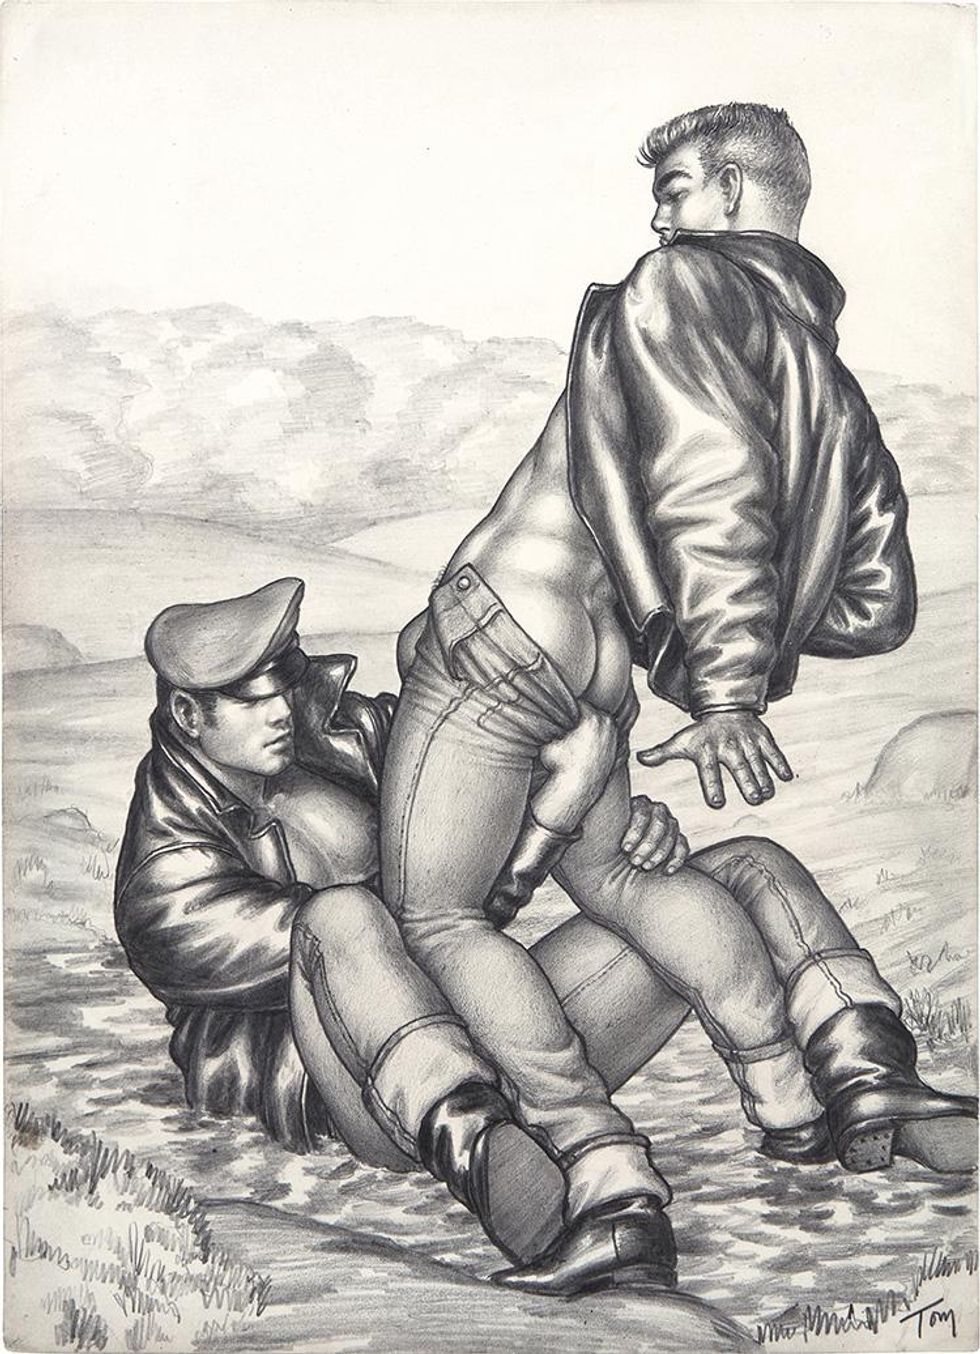 The Motorcycle Series by Tom of Finland